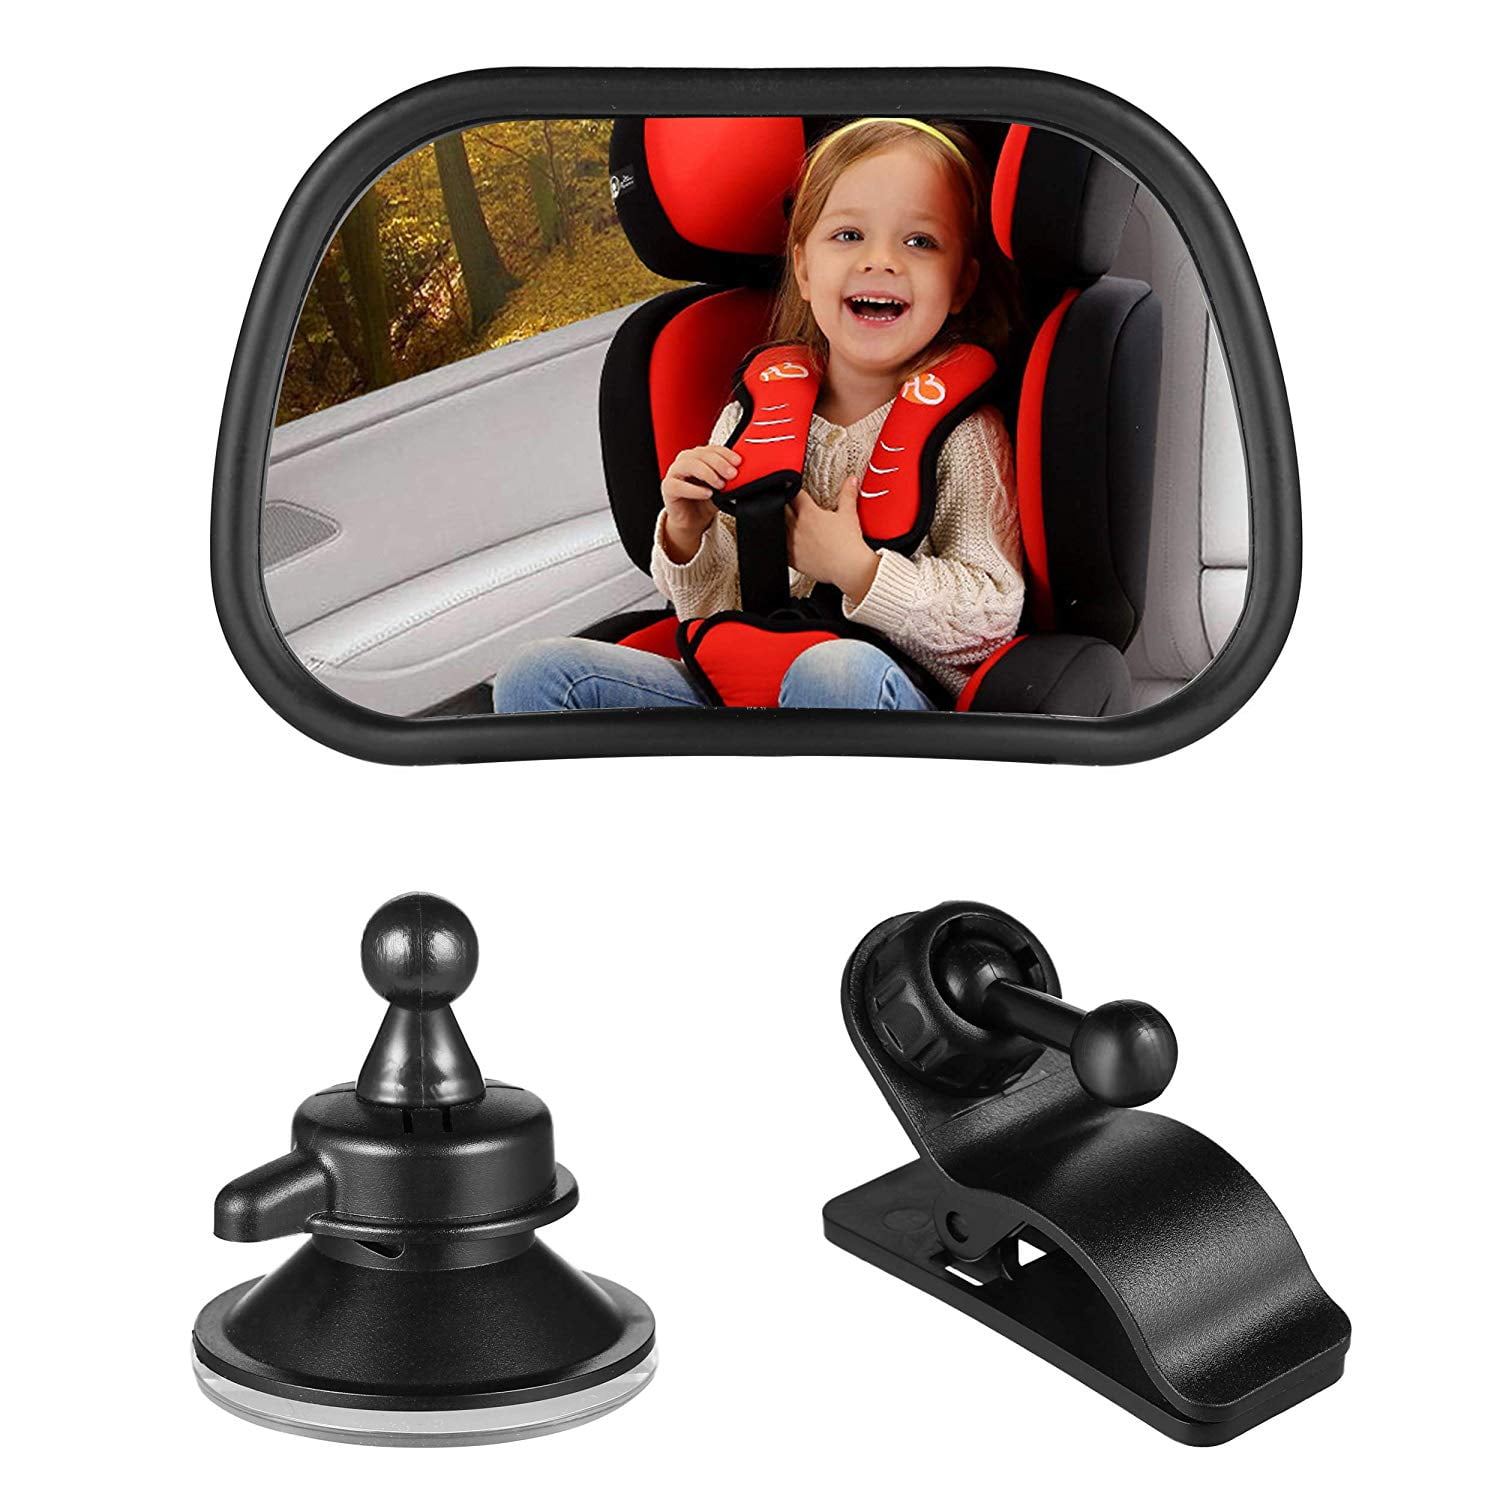 1× Baby Kid Rear Facing View Mirrors Car Seat Back Safety Infant Child Care Ward 